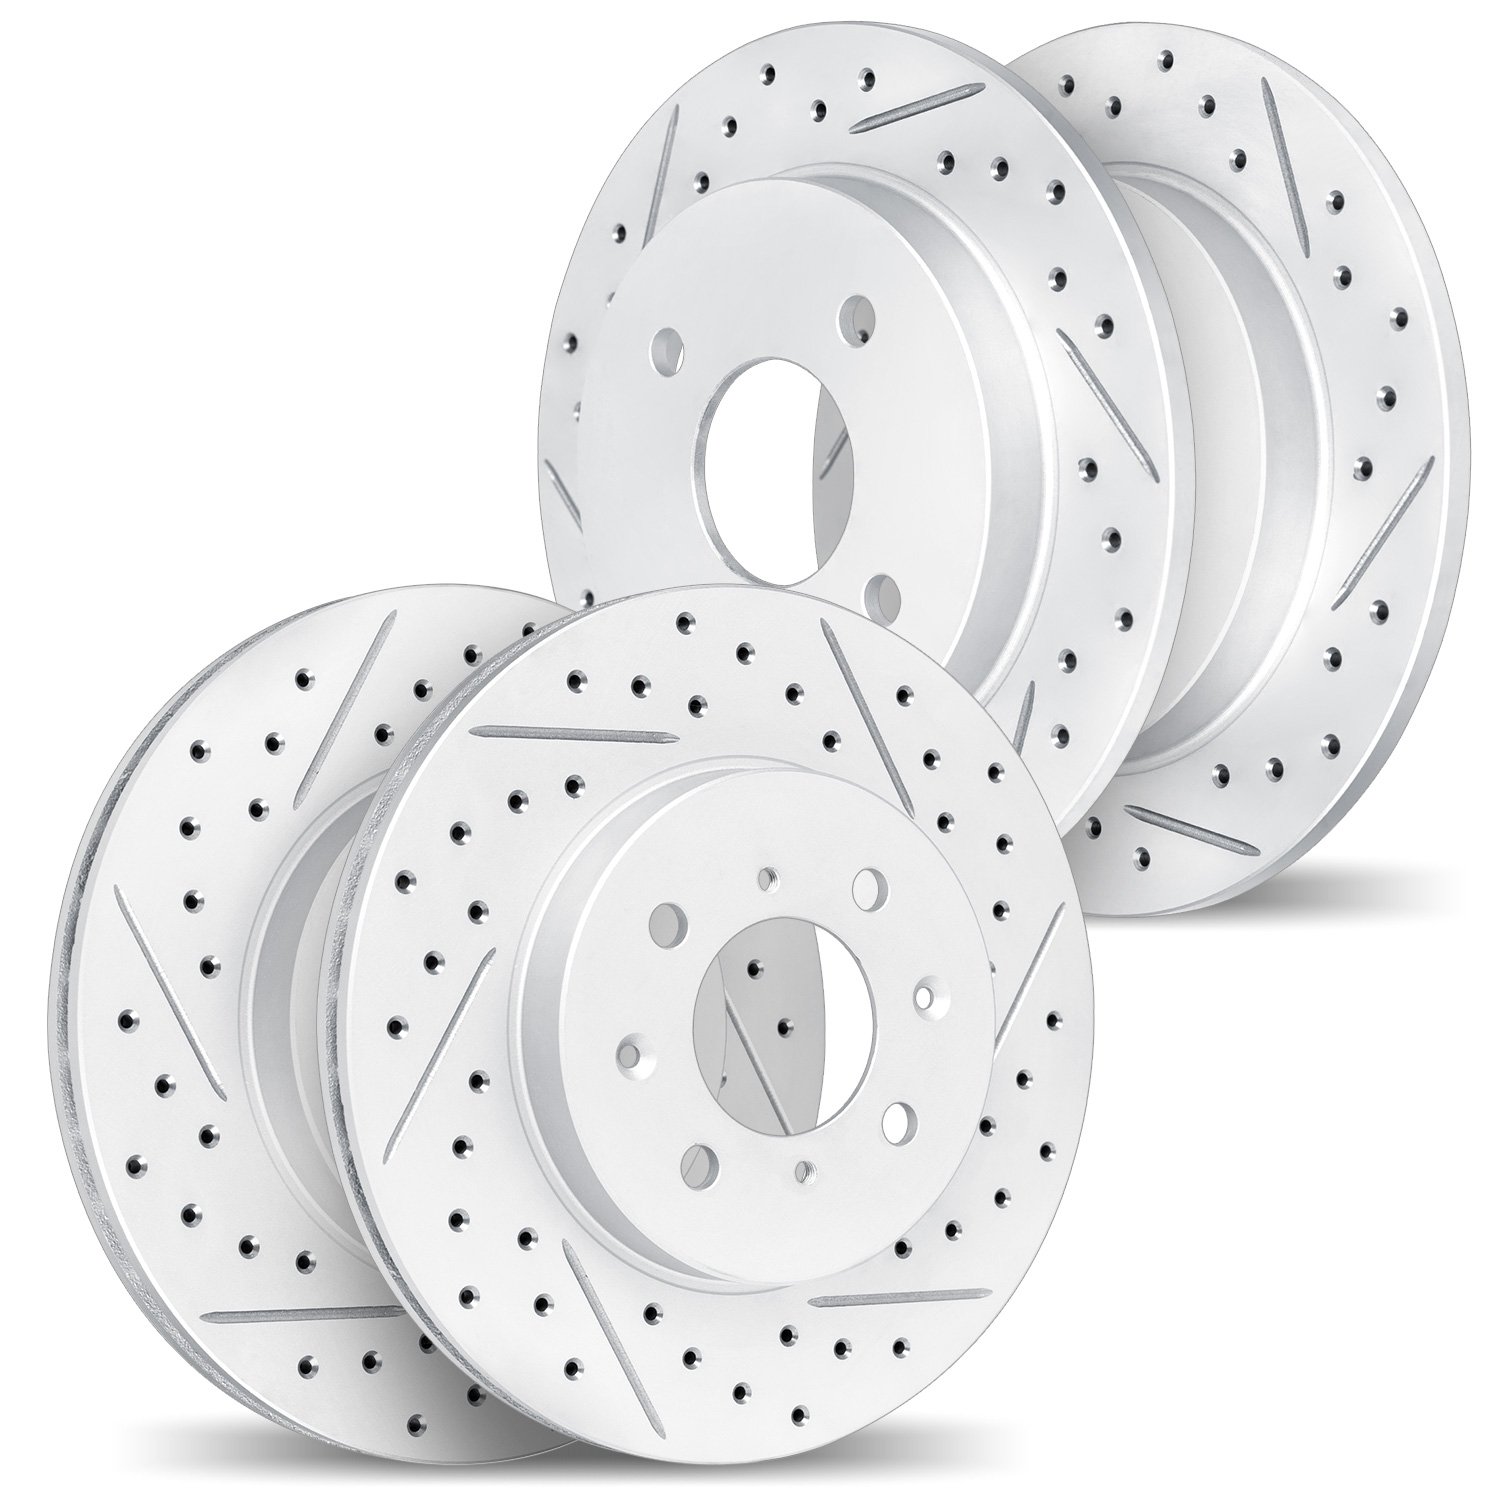 2004-59000 Geoperformance Drilled/Slotted Brake Rotors, 1992-1997 Acura/Honda, Position: Front and Rear